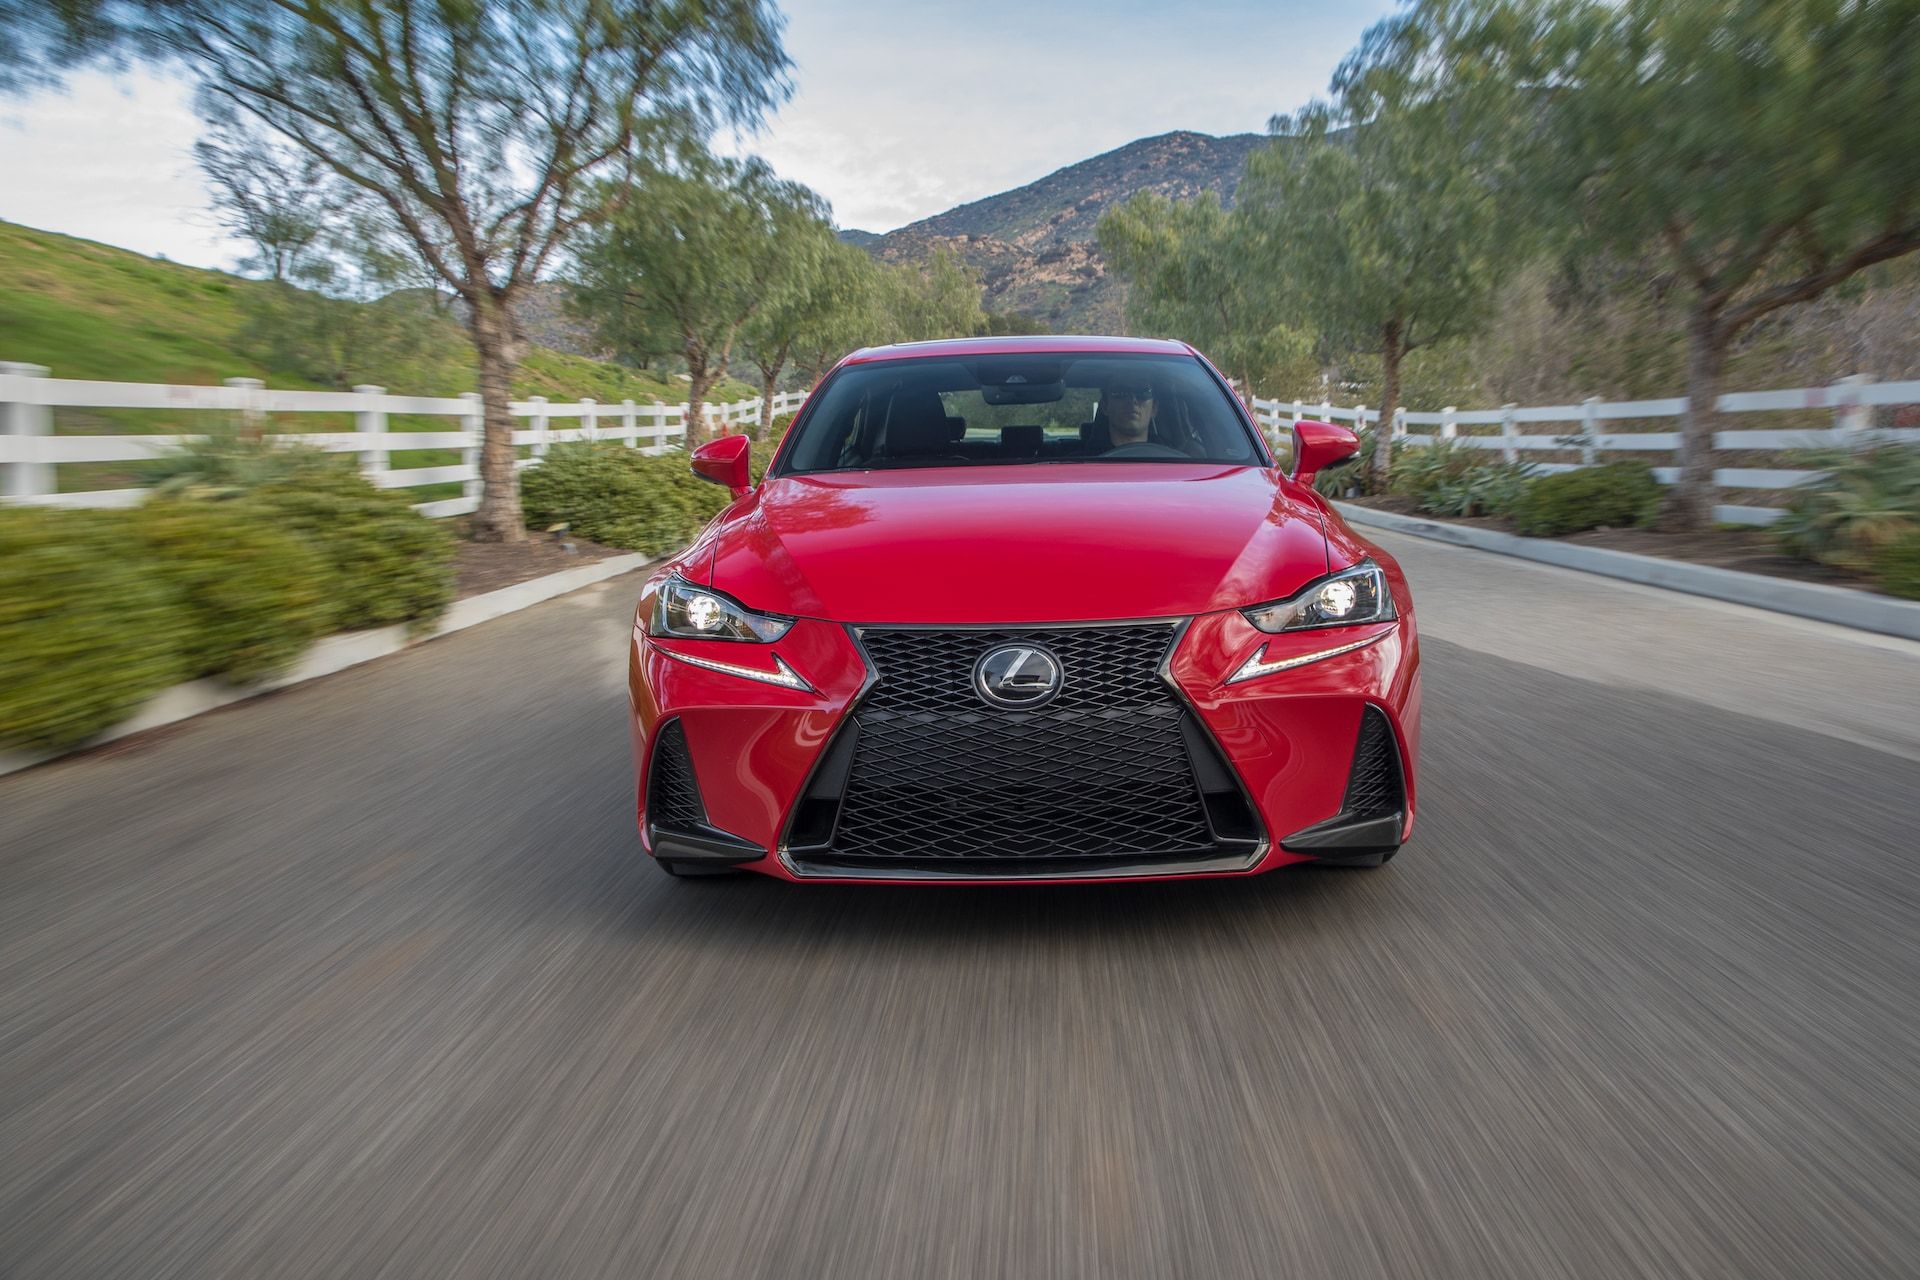 2017 Lexus Is 200t Front End In Motion (Gallery 49 of 51)